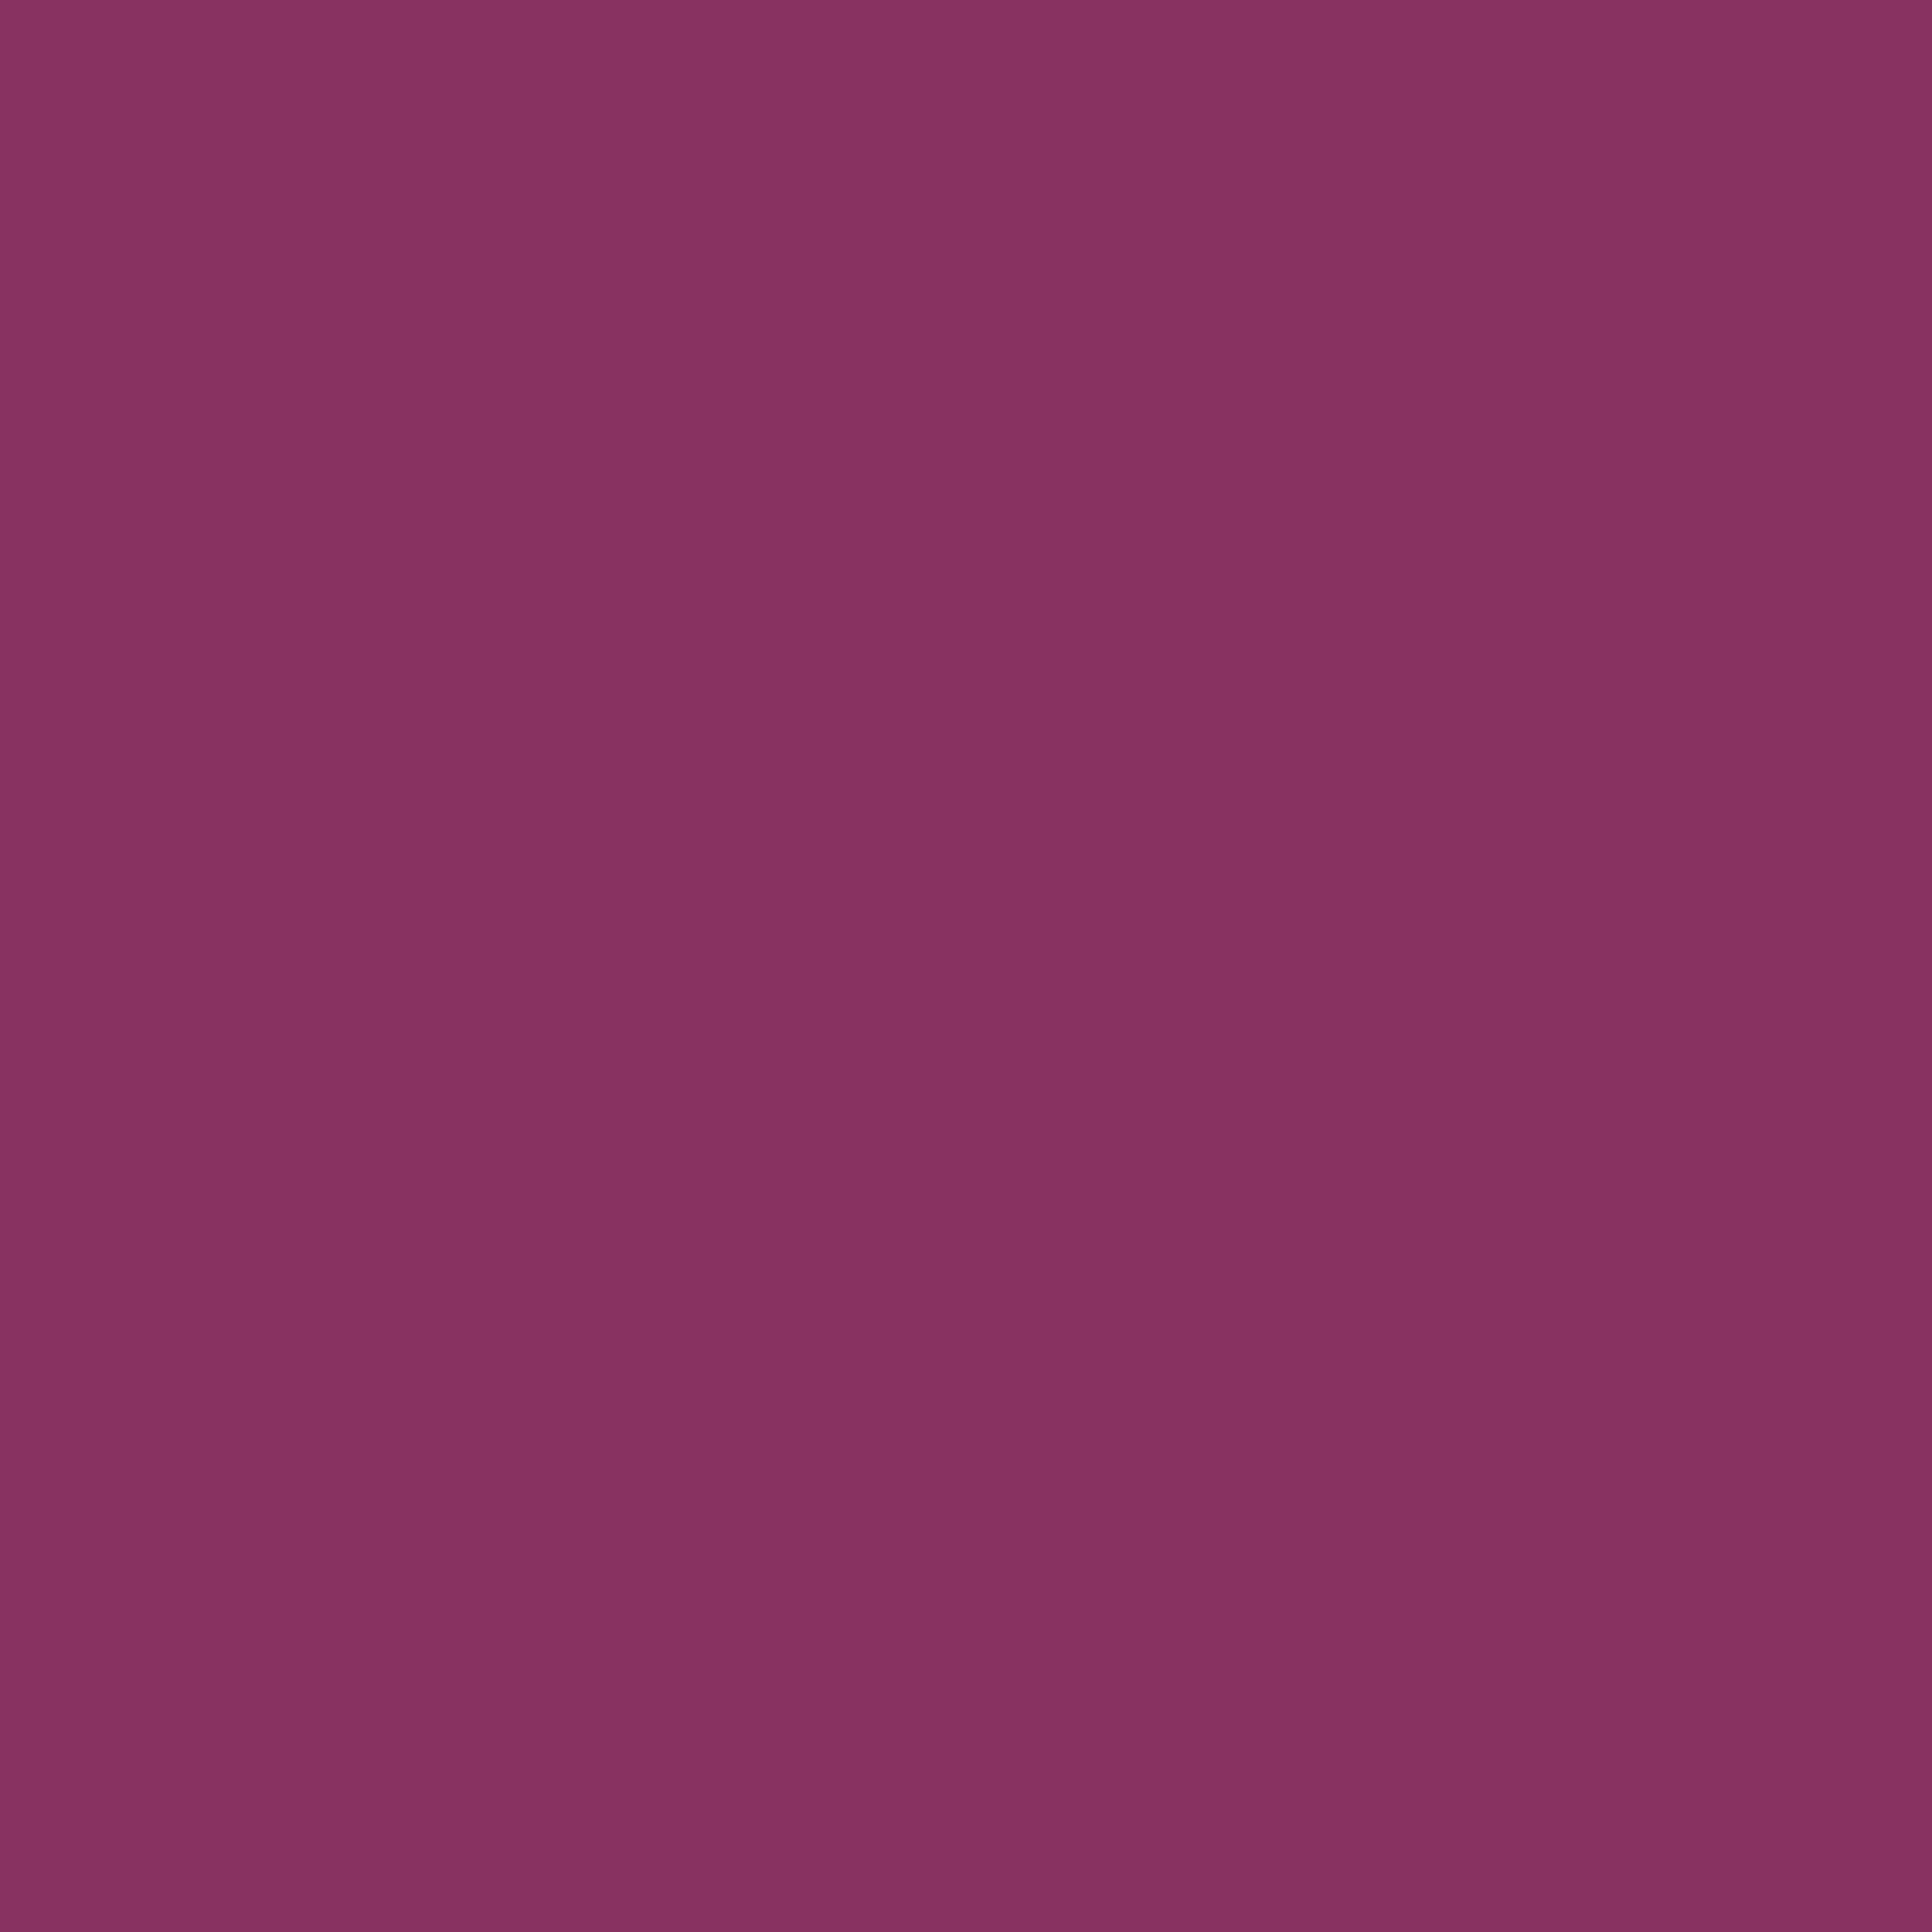 3600x3600 Boysenberry Solid Color Background